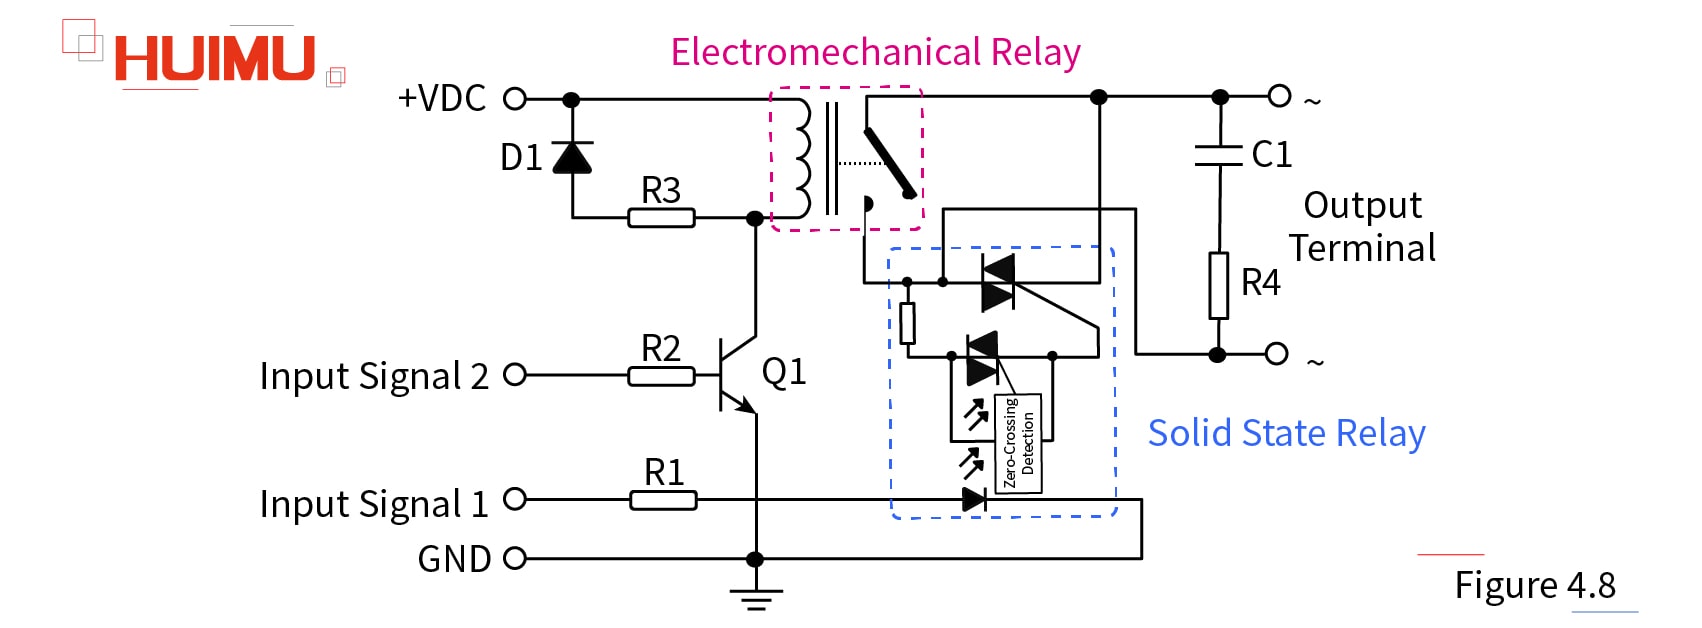 When Input Signal 1 is applied, the SSR immediately switches to the on state. Since the electronic switch has no moving parts, it can switch the load stably and quickly, and does not generate an arc due to high line voltage or heavy surge current during switching. After the load current is generated, the EMR will be controlled by the control signal 2 and switched on. Because the EMR is connected in parallel with the SSR, the output contact of the EMR is energized without voltage, and there is no arcing across the contacts. Then after a certain delay, the contact bouncing of the EMR settles down, and the SSR will be turned off.